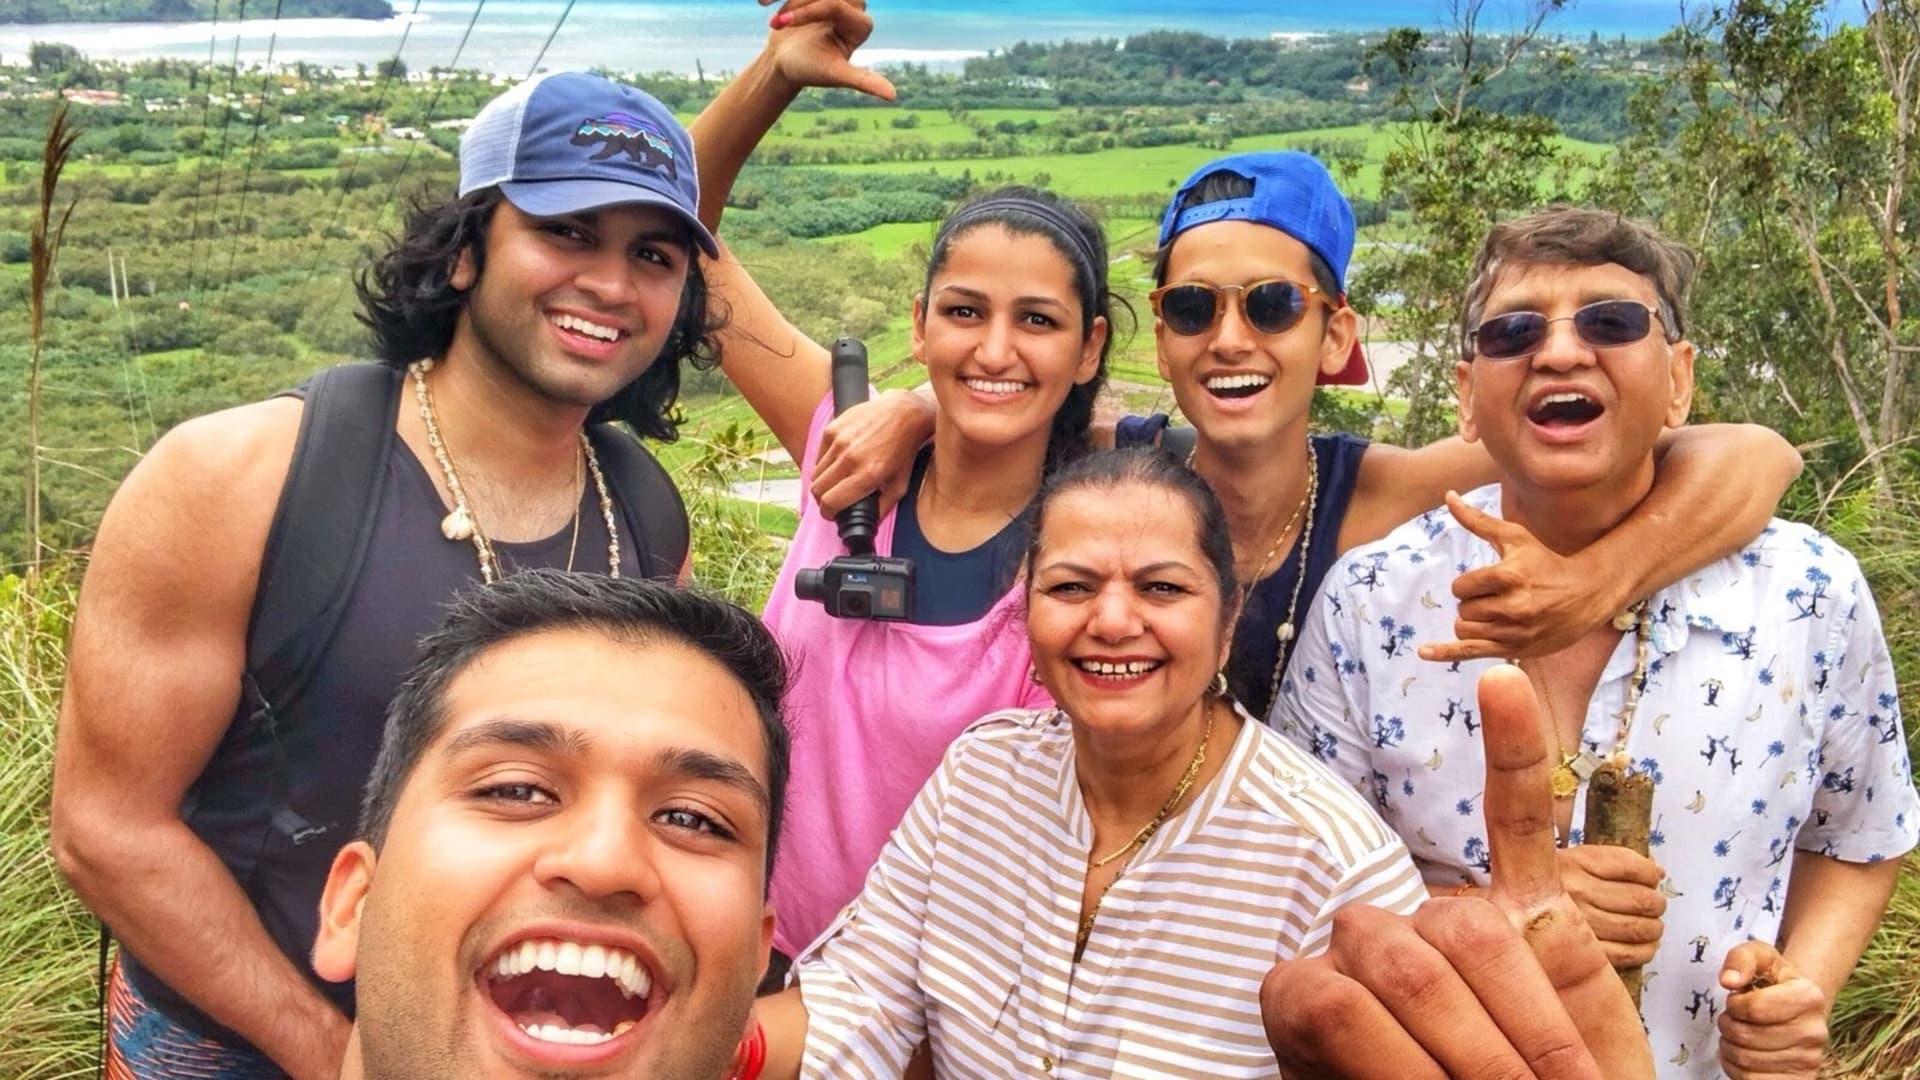 The Mehta family on a trip in Hawaii.